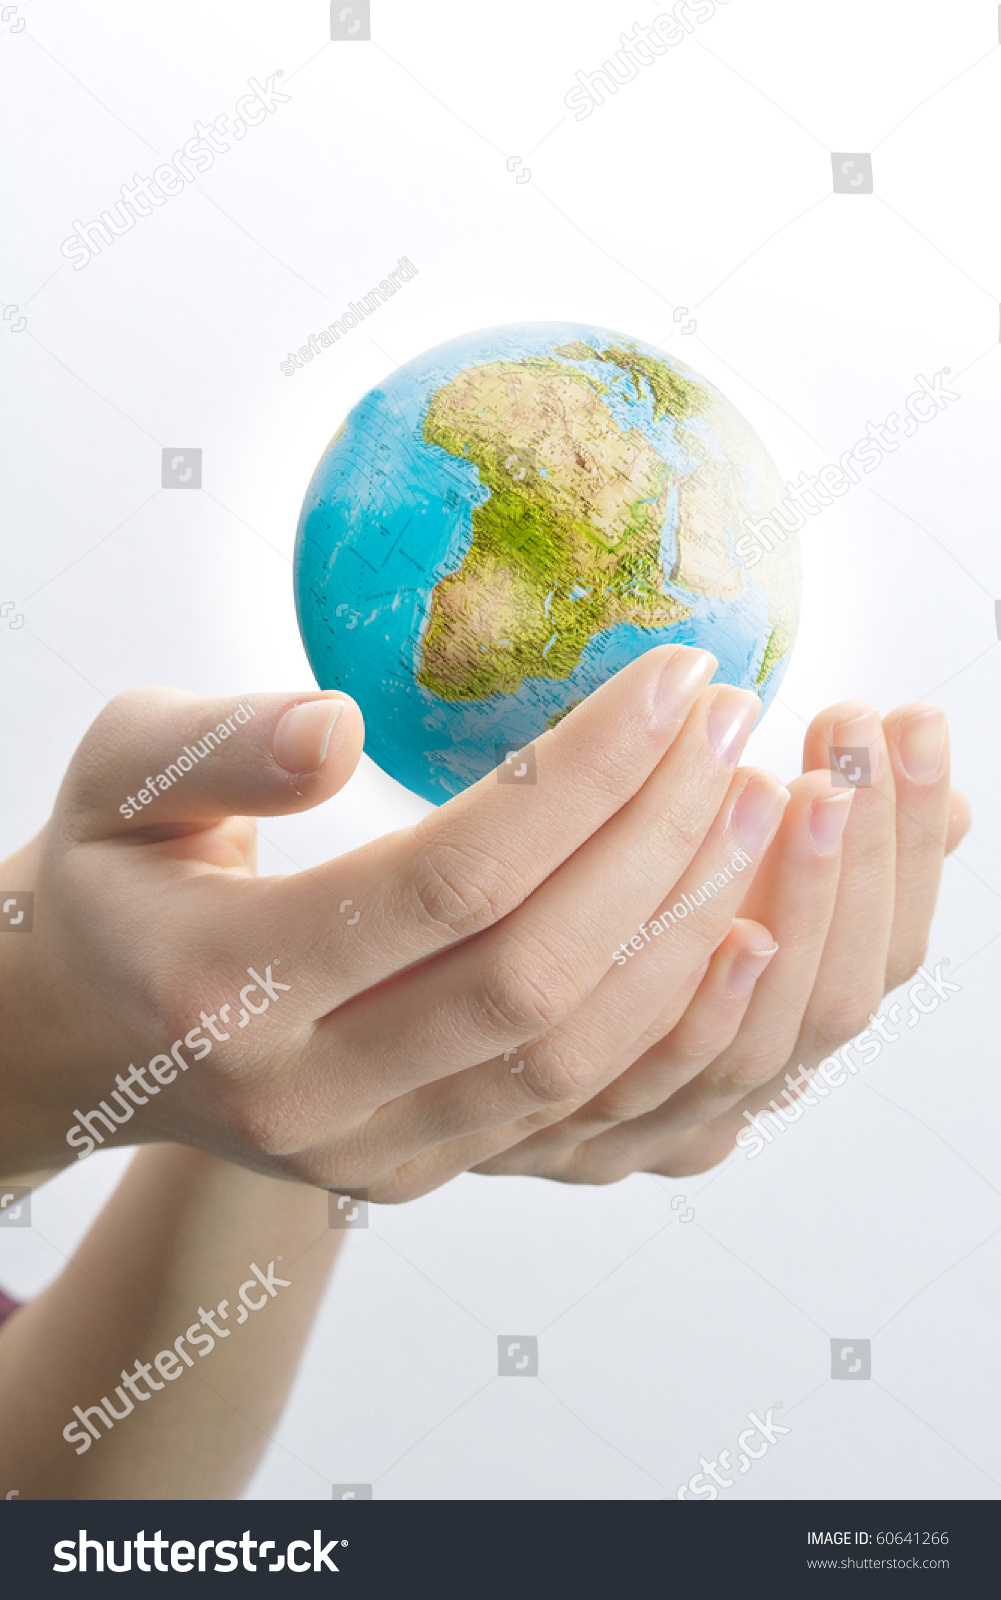 Female hands palms up on white background save the globe from falling. #60641266